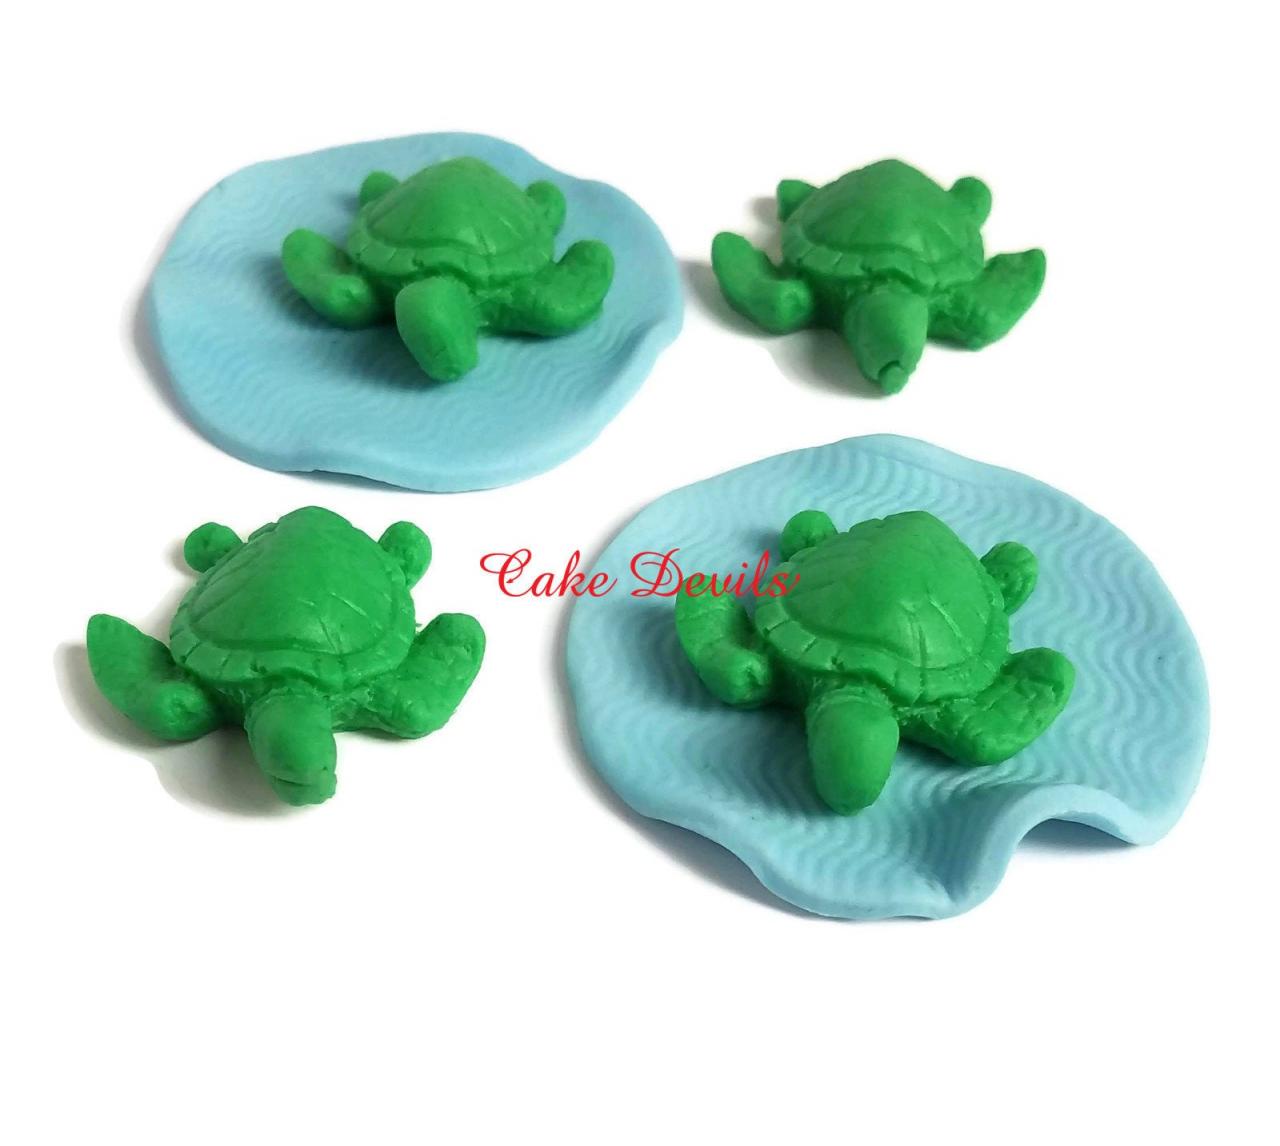 3d Fondant Turtle Cupcake Toppers, Handmade Edible Sea Turtle Cake Decorations, Turtle Birthday Party